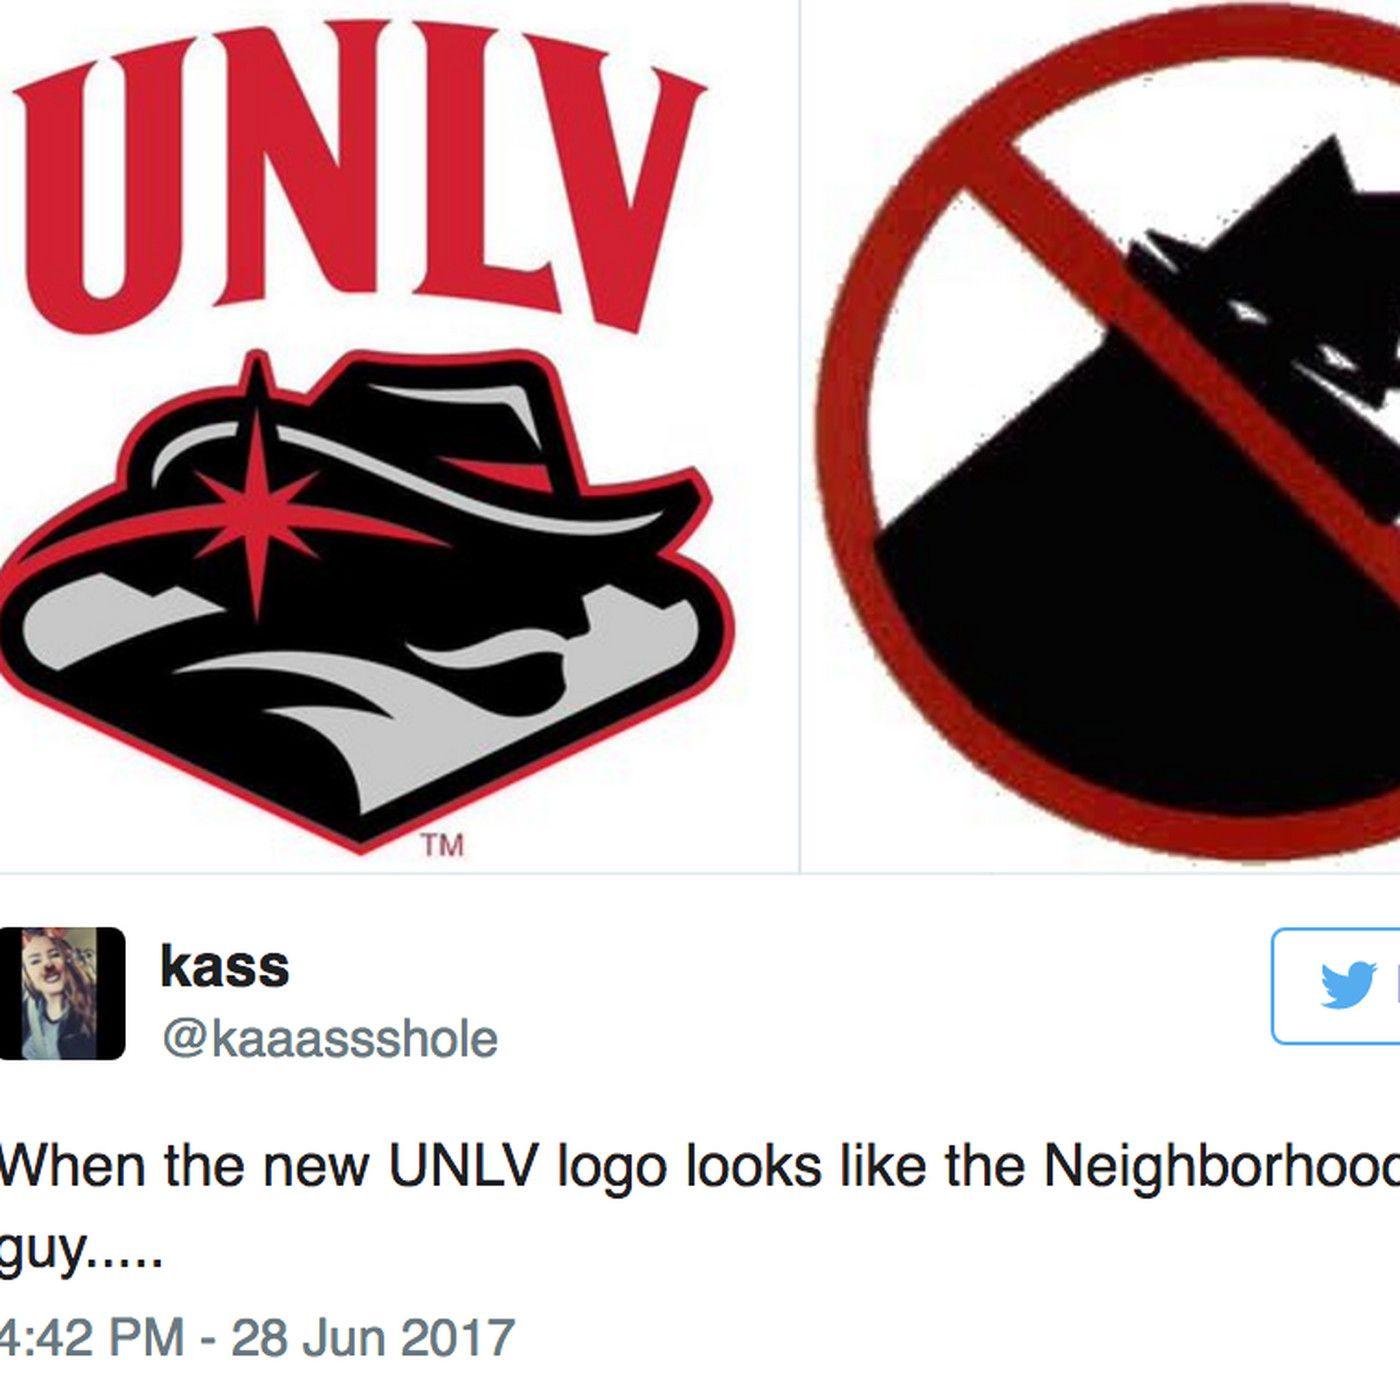 UNLV Logo - What does UNLV's complicated new logo look like to you?